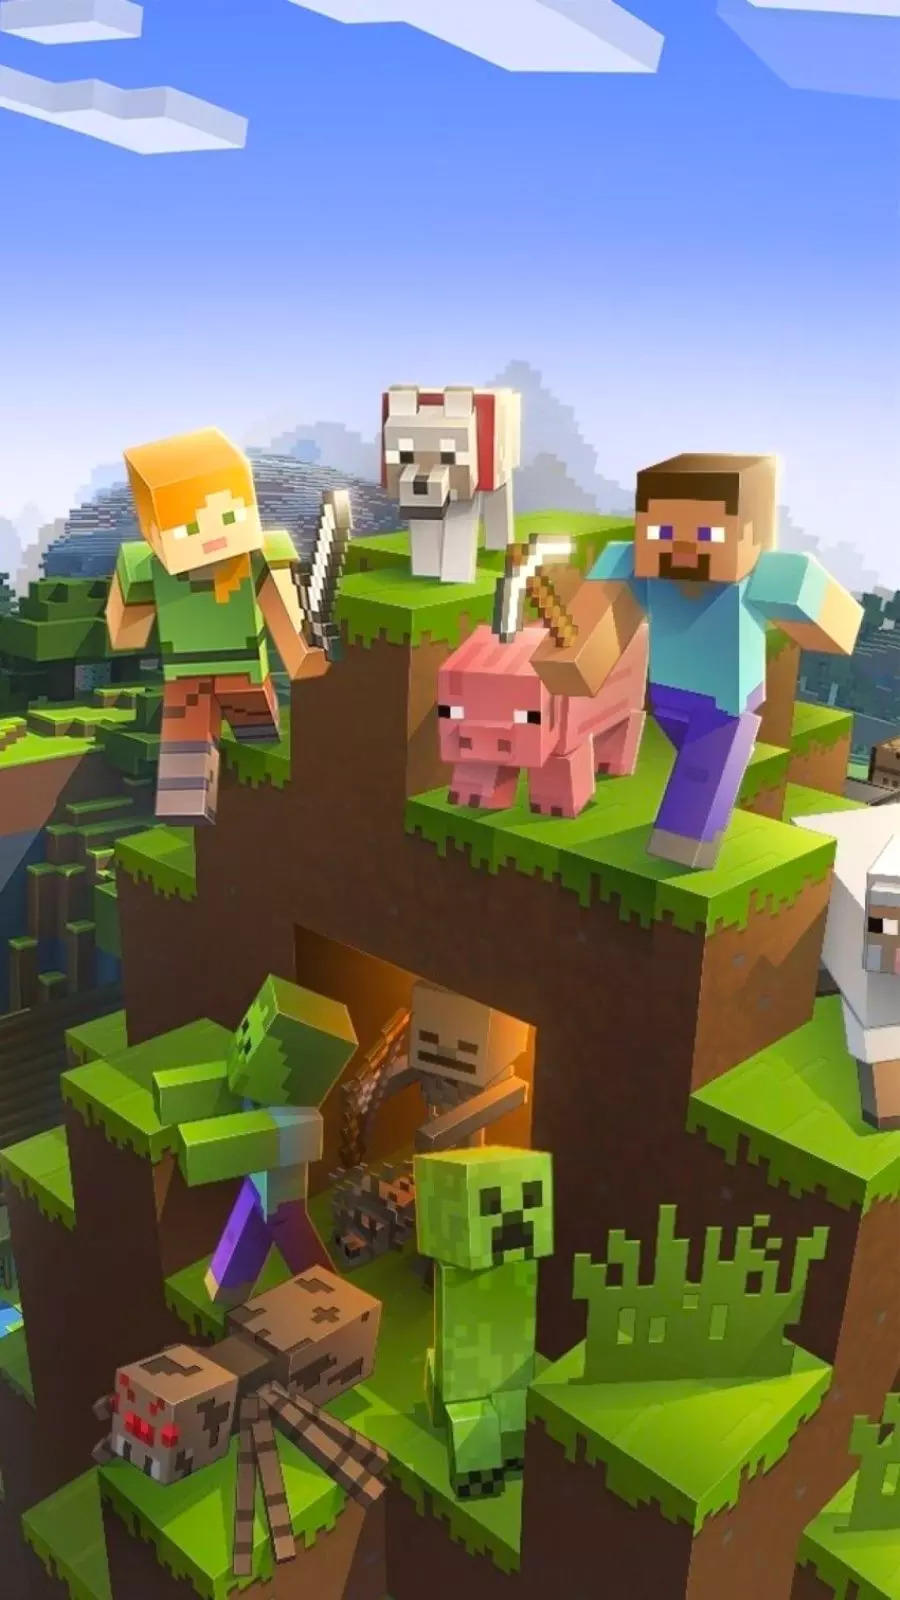 New Features Coming In Minecraft 1.20 Update